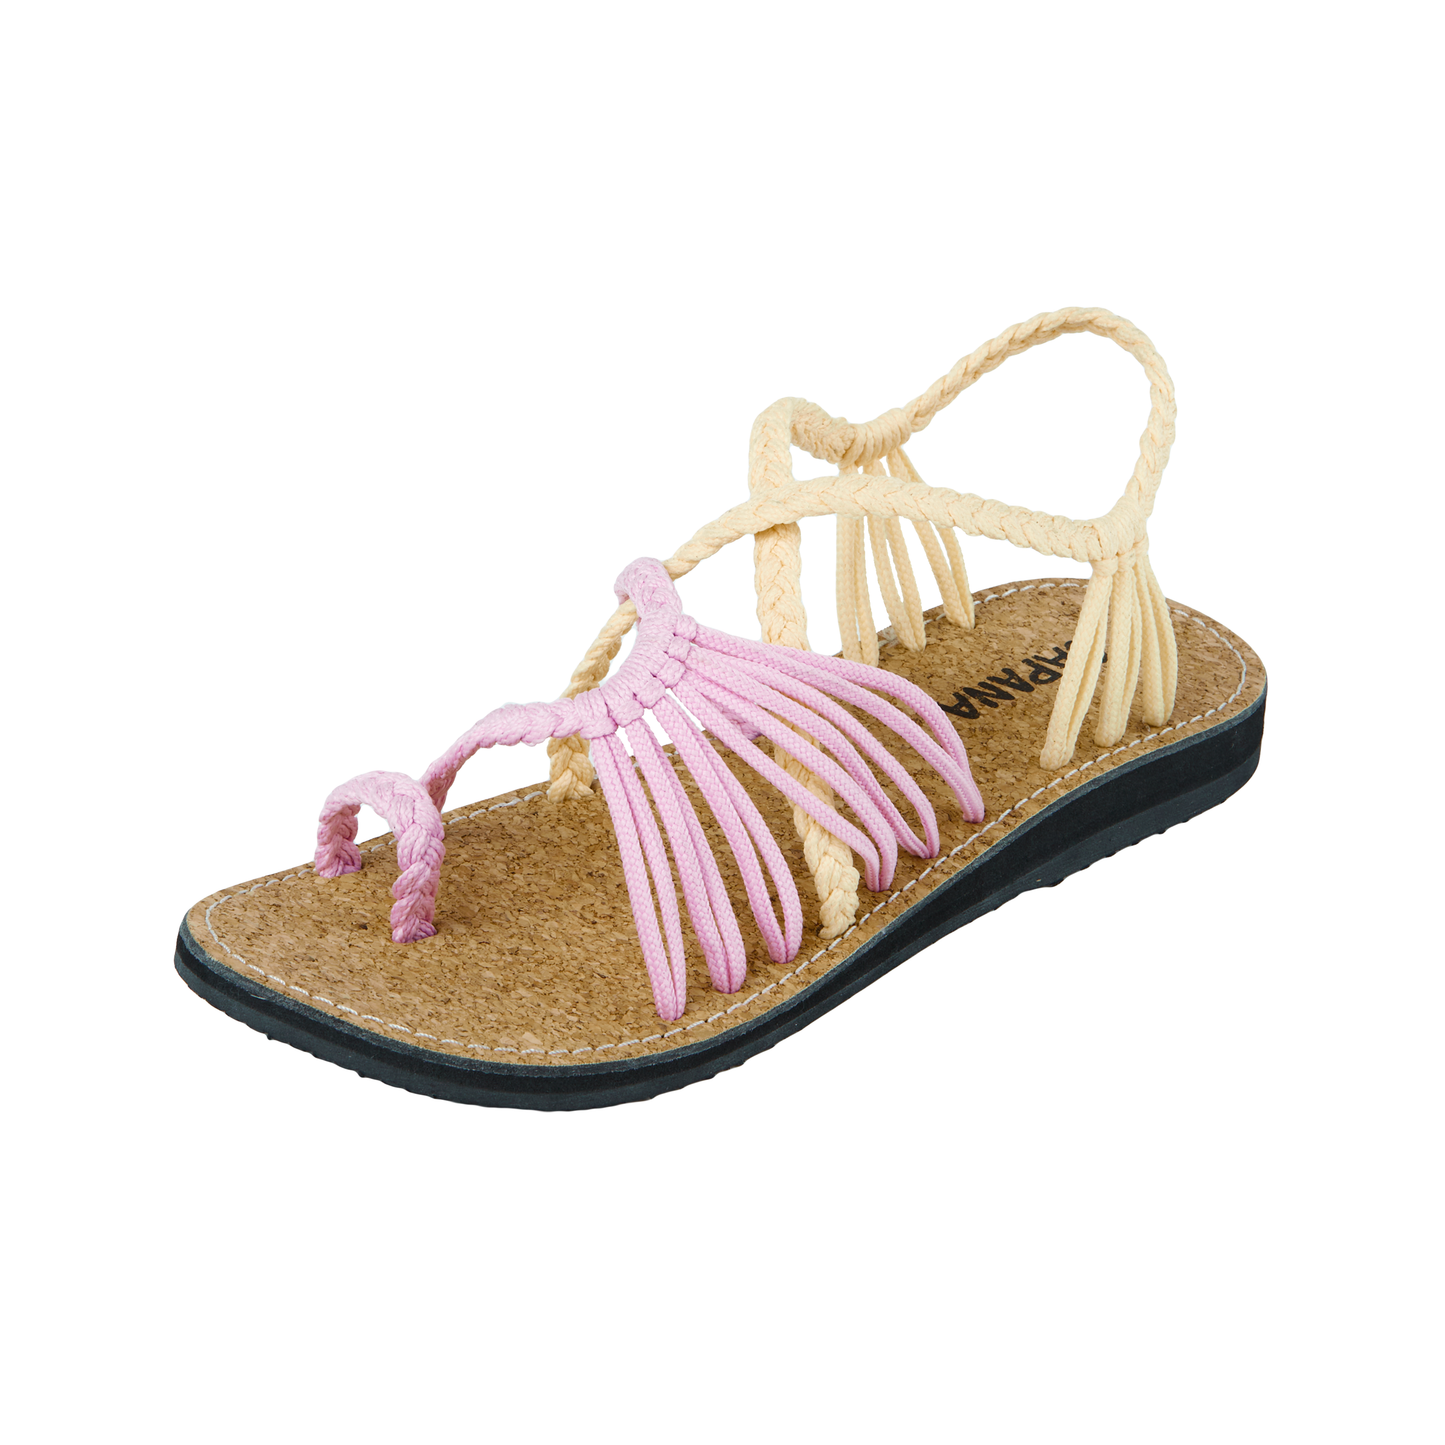 Hand woven sandals Candy Cream Rope Sandals on the side  in white background